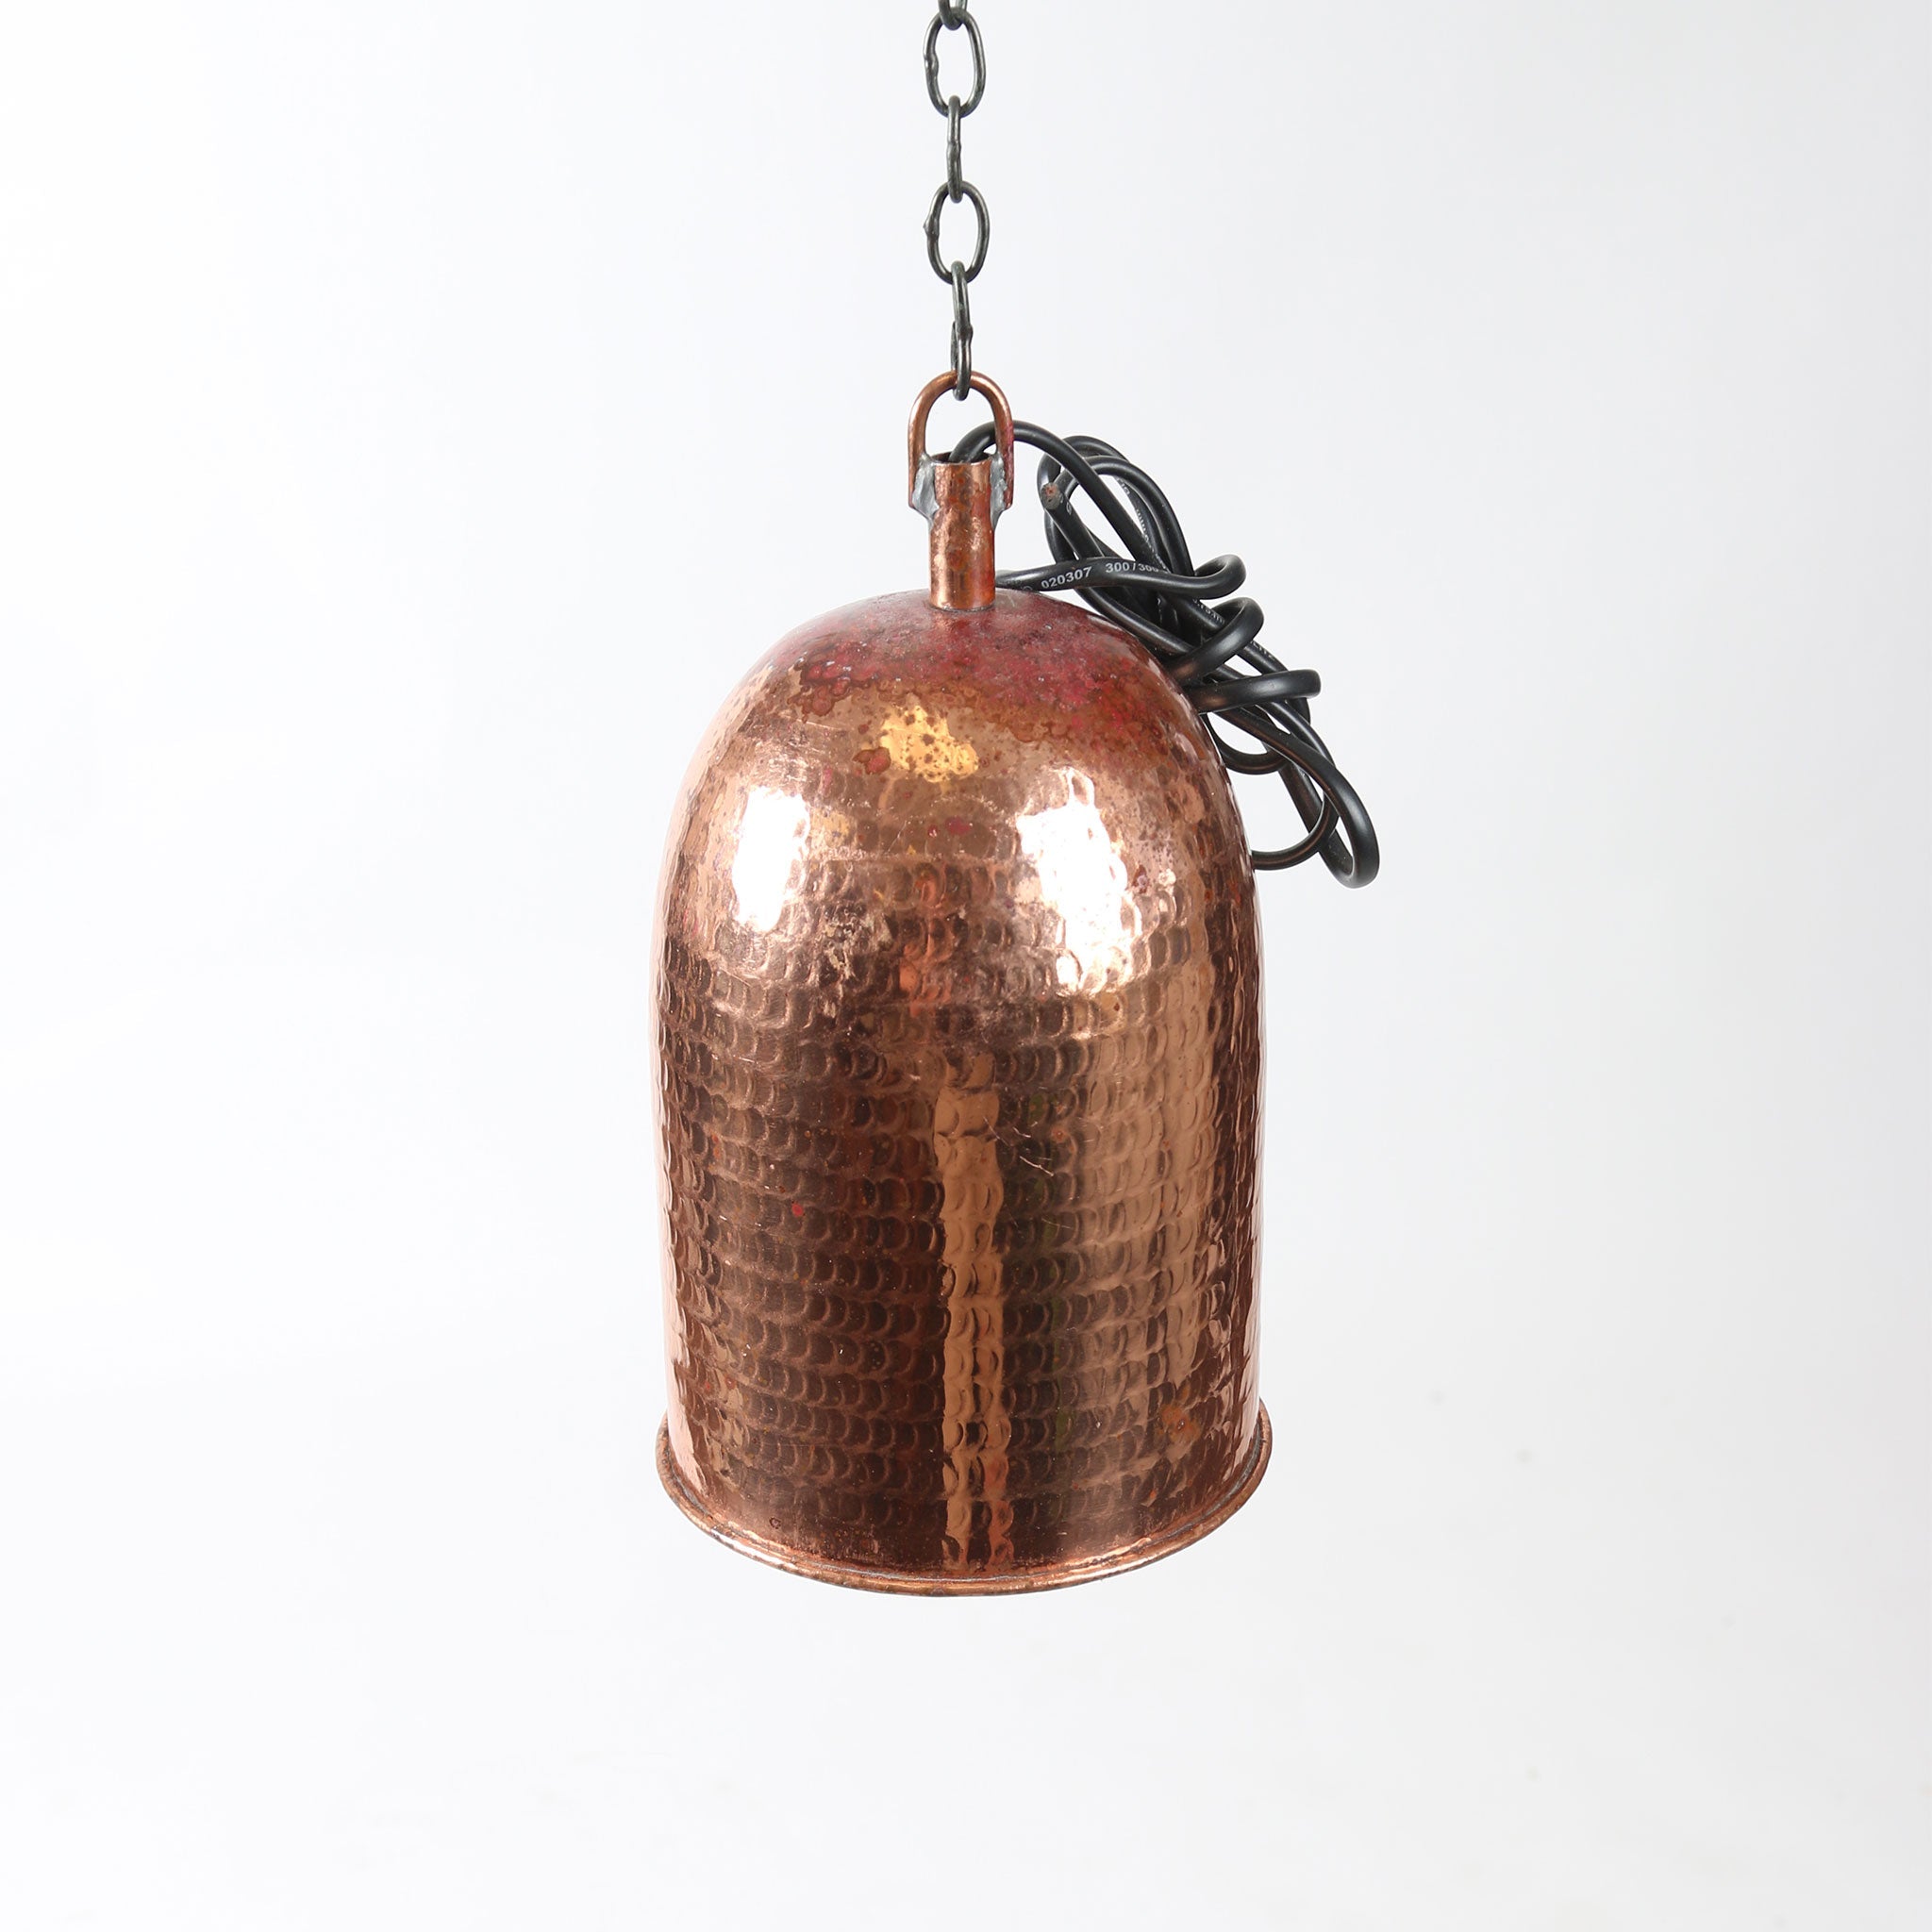 Small Copper Bell Shaped Pendant Light Shade